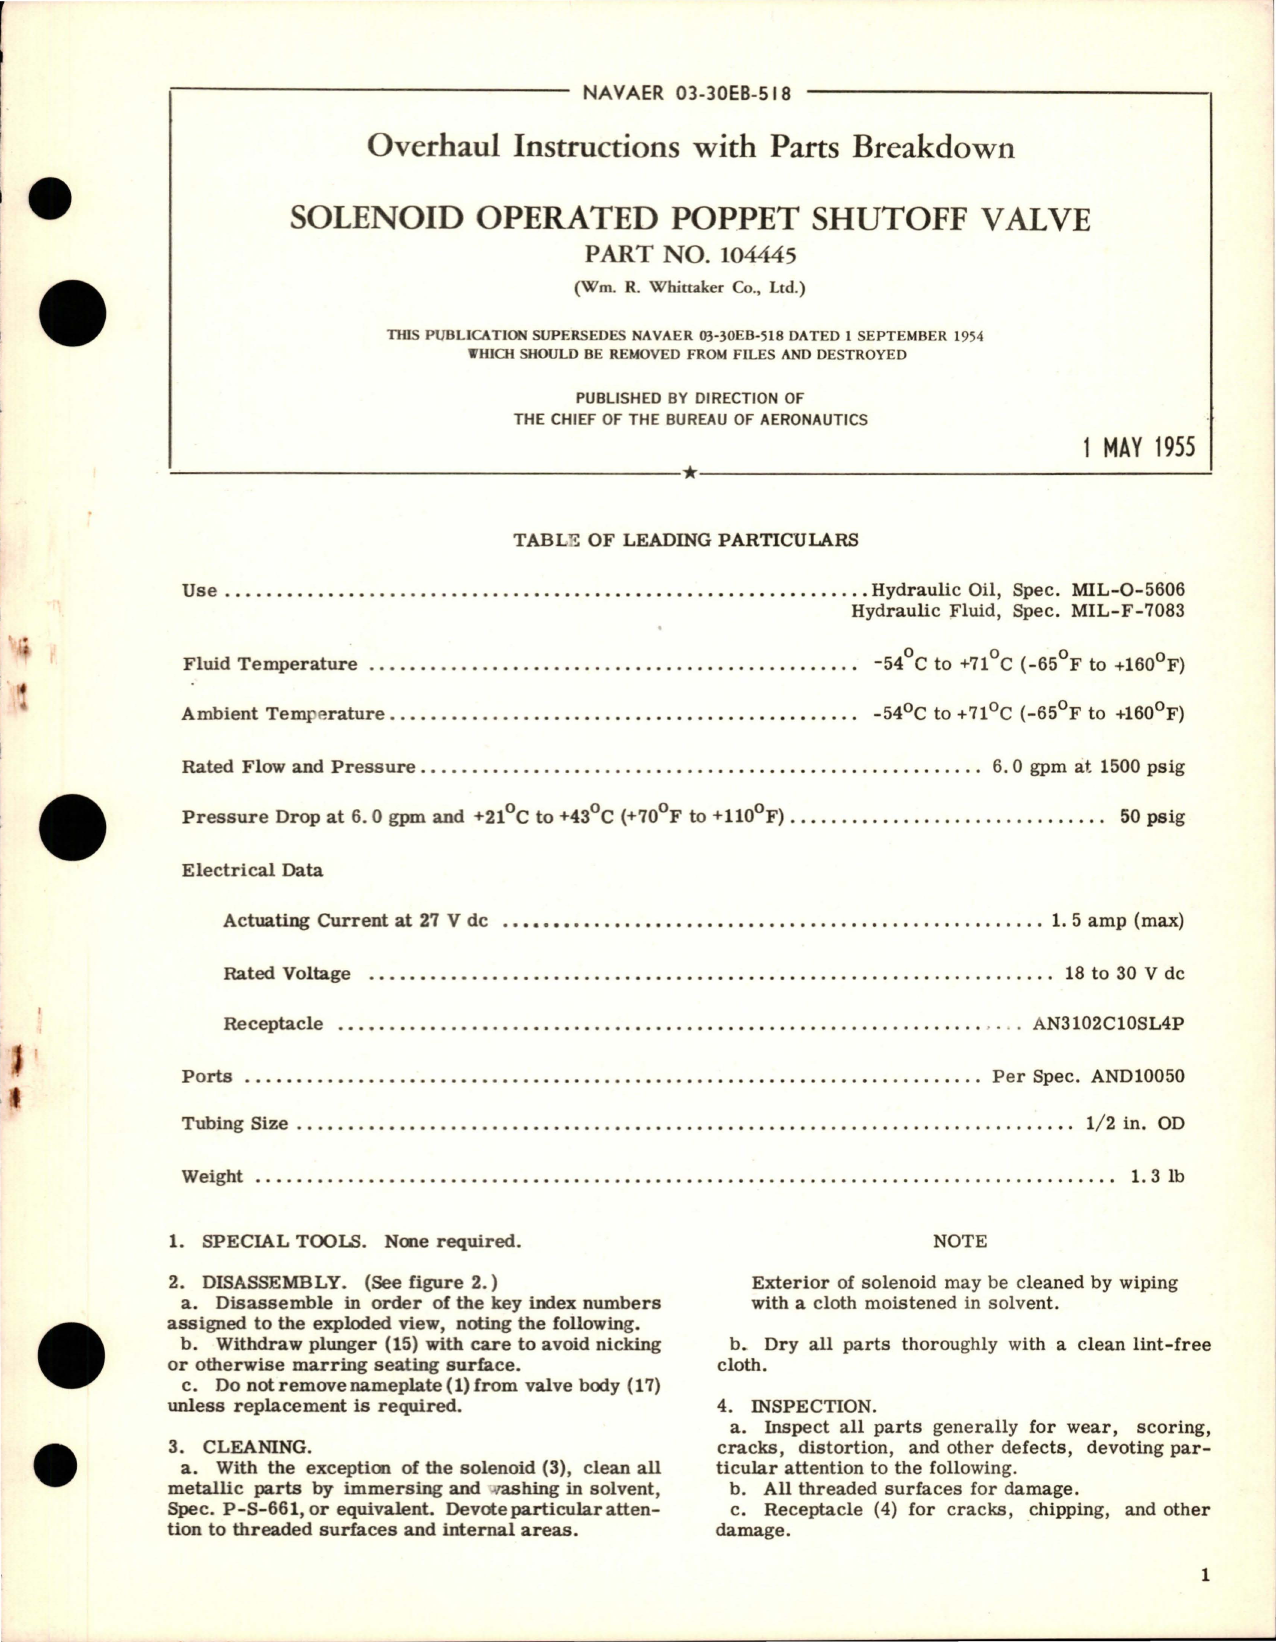 Sample page 1 from AirCorps Library document: Overhaul Instructions with Parts for Solenoid Operated Poppet Shut Off Valve - Part 104445